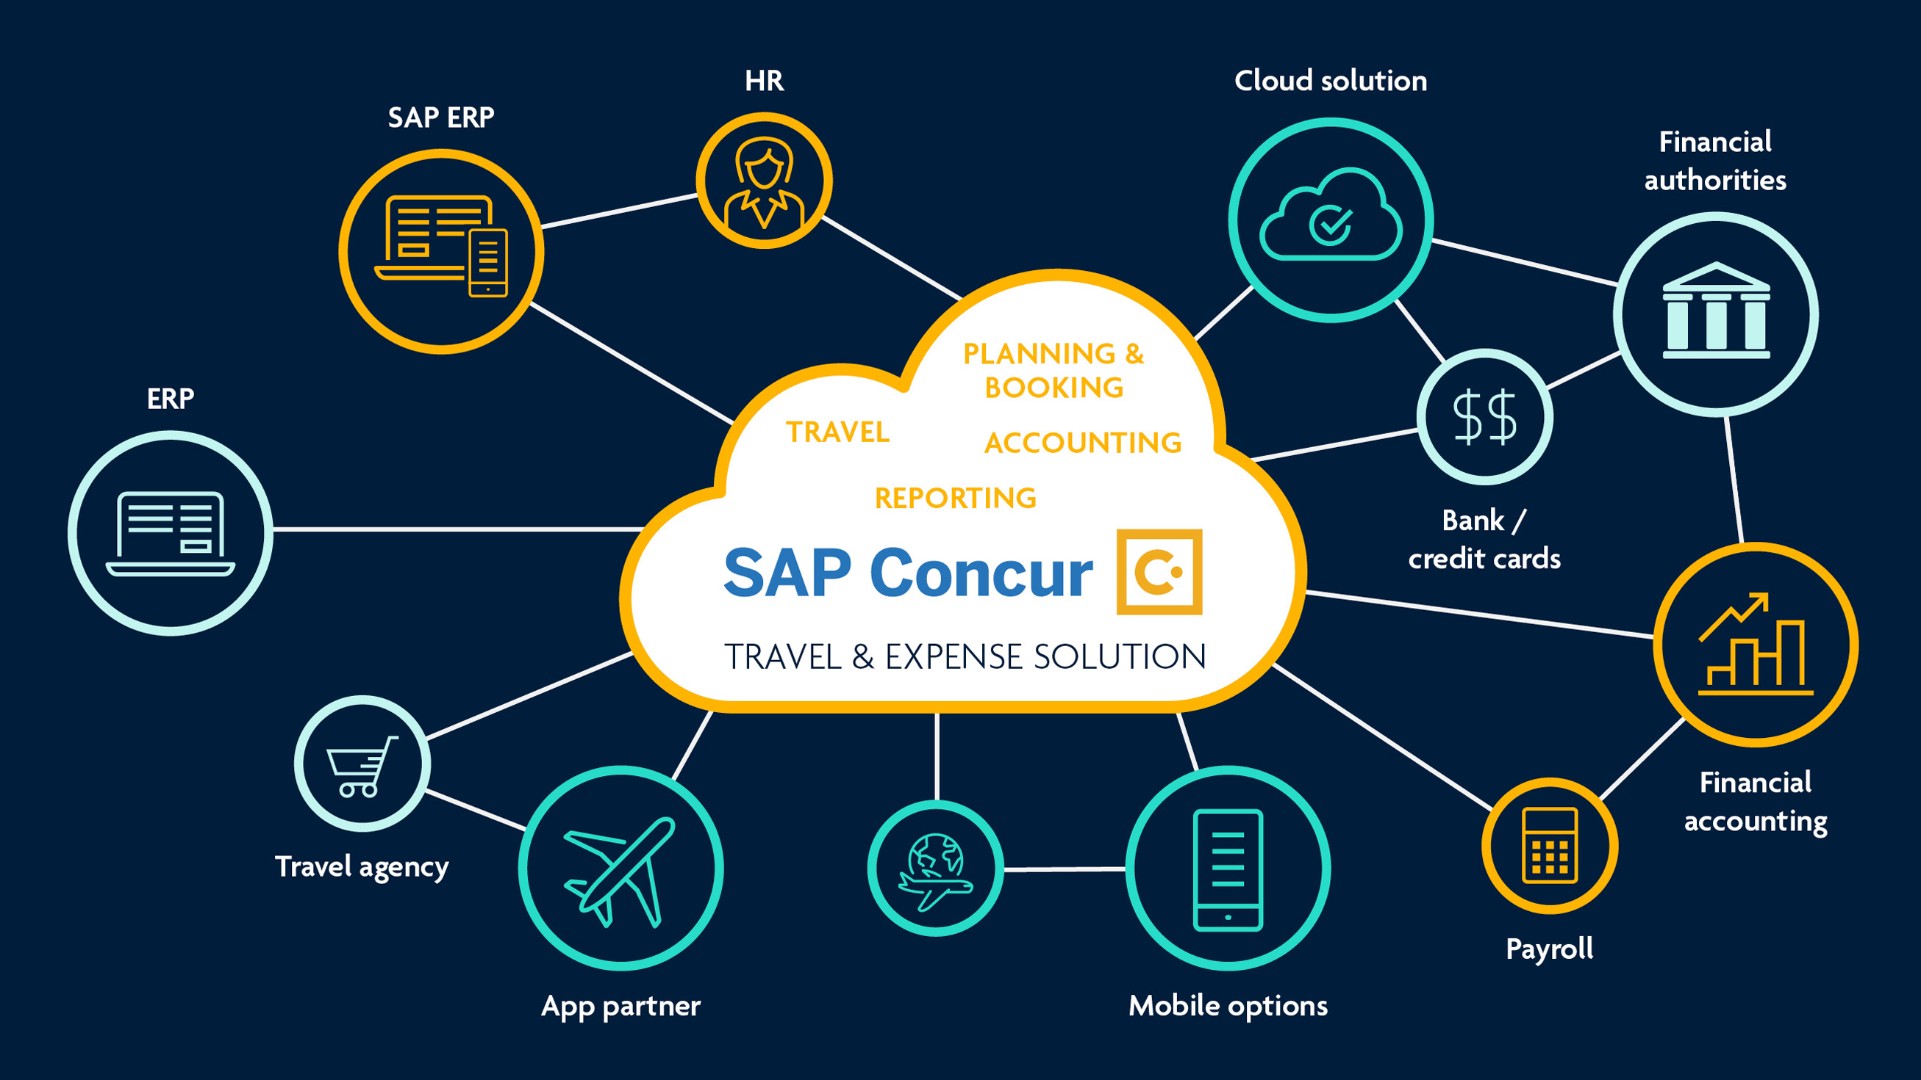 SAP Concur benefits people and processes